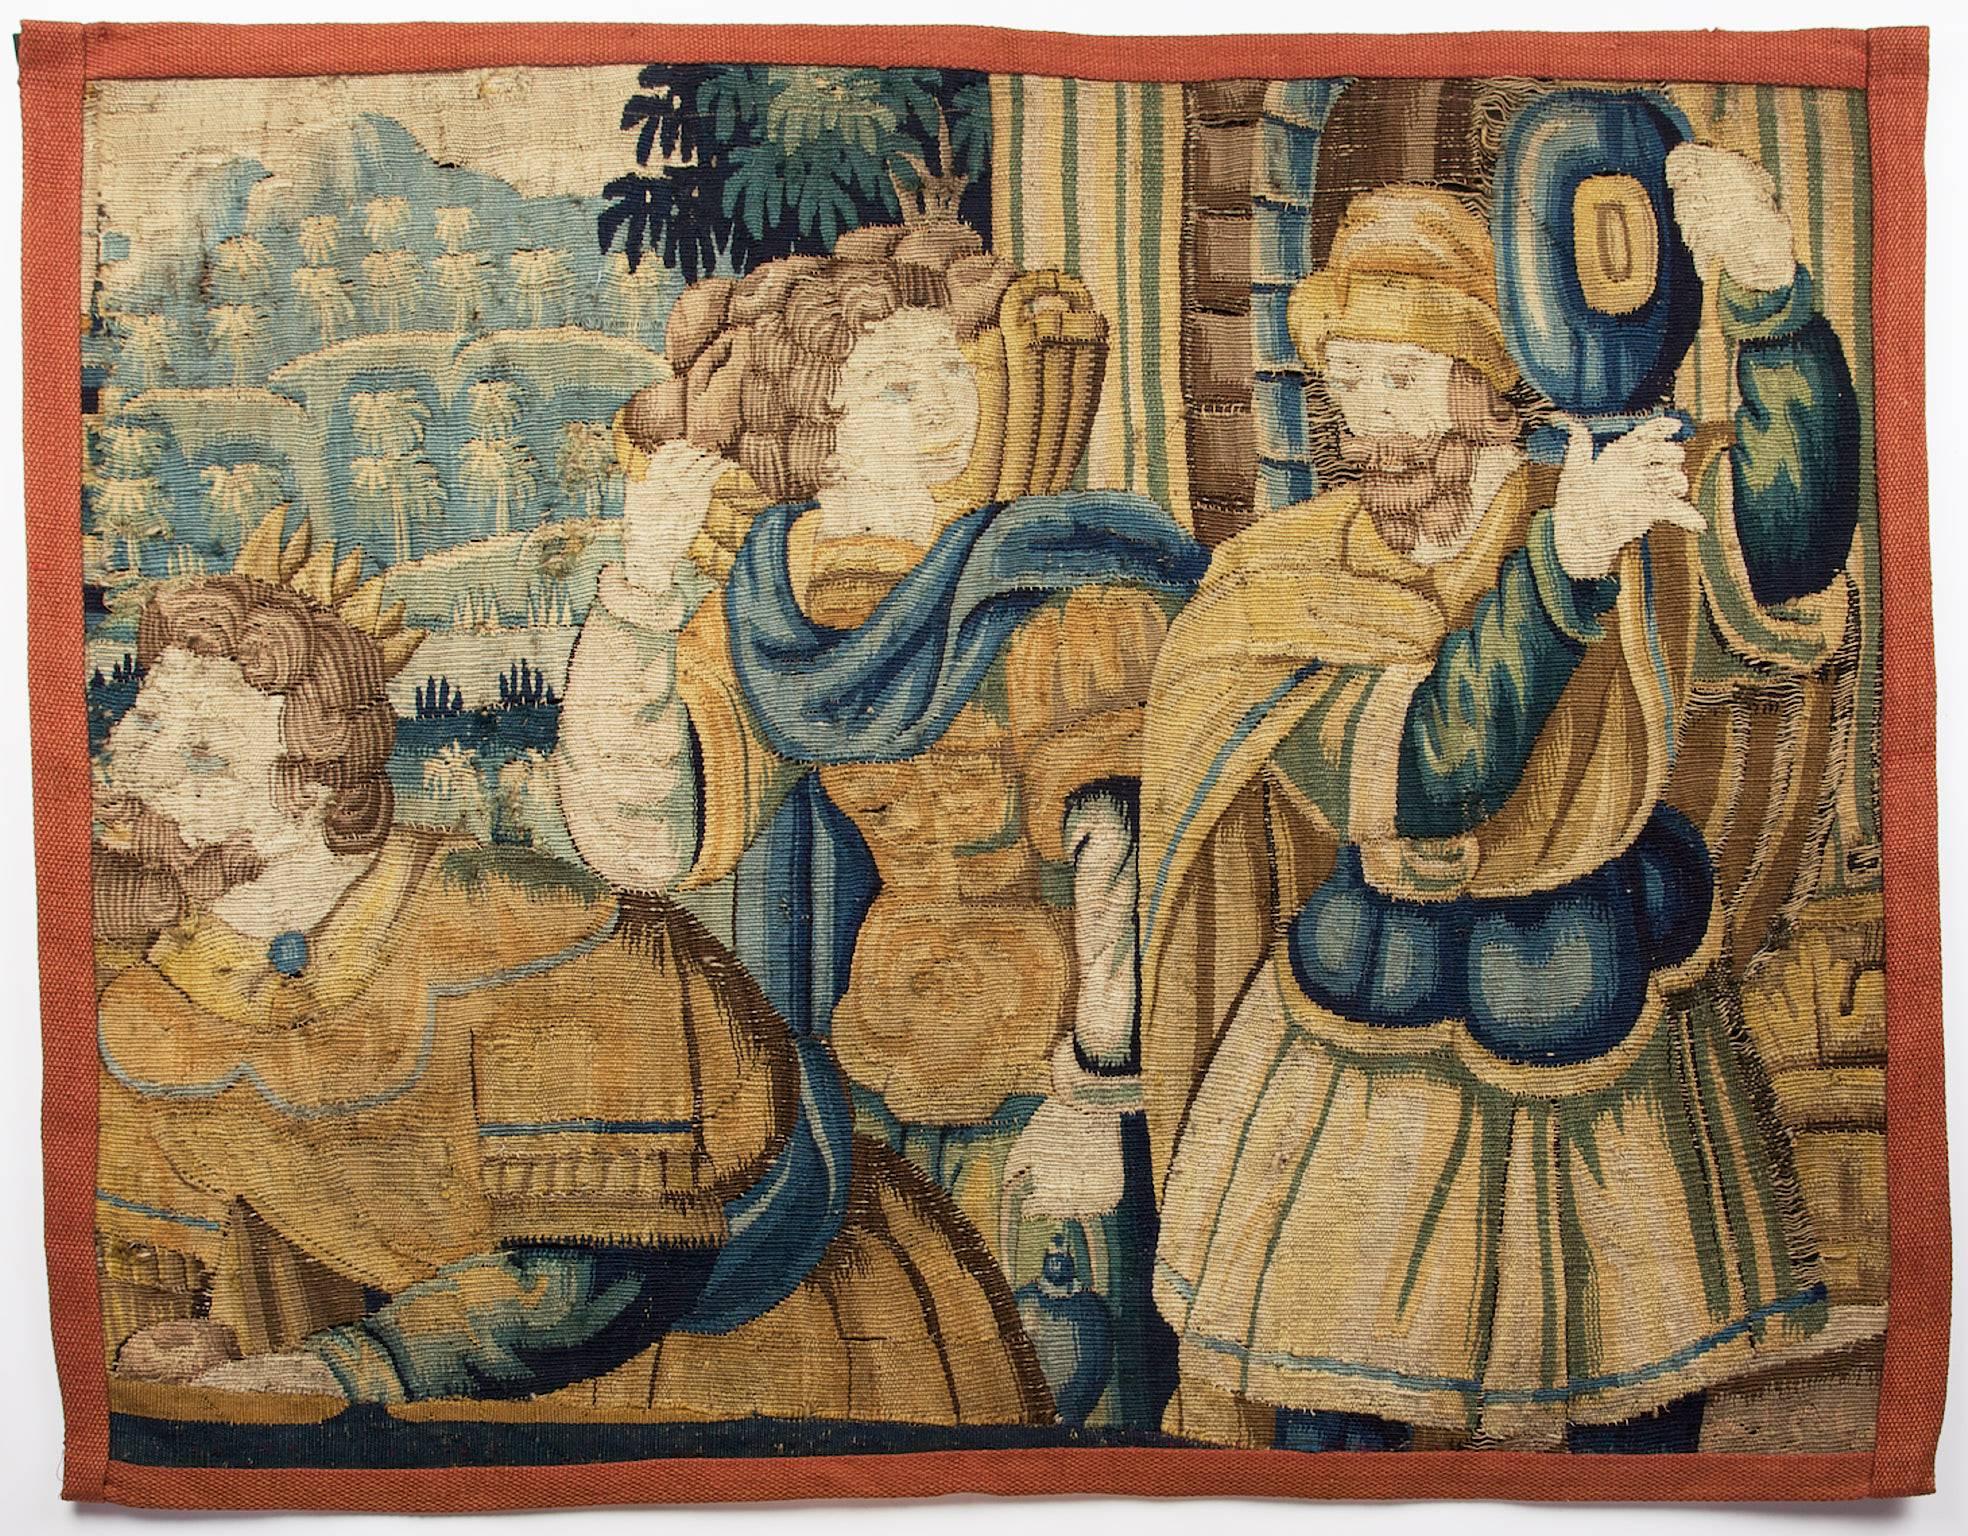 Section of late 16th century tapestry, Brussels, Belgium.

Tapestry featuring three figures, carrying gifts of fruit, an urn and one figure crowned. The scene removed from a larger original Tapestry, with modern border.

From the collection of